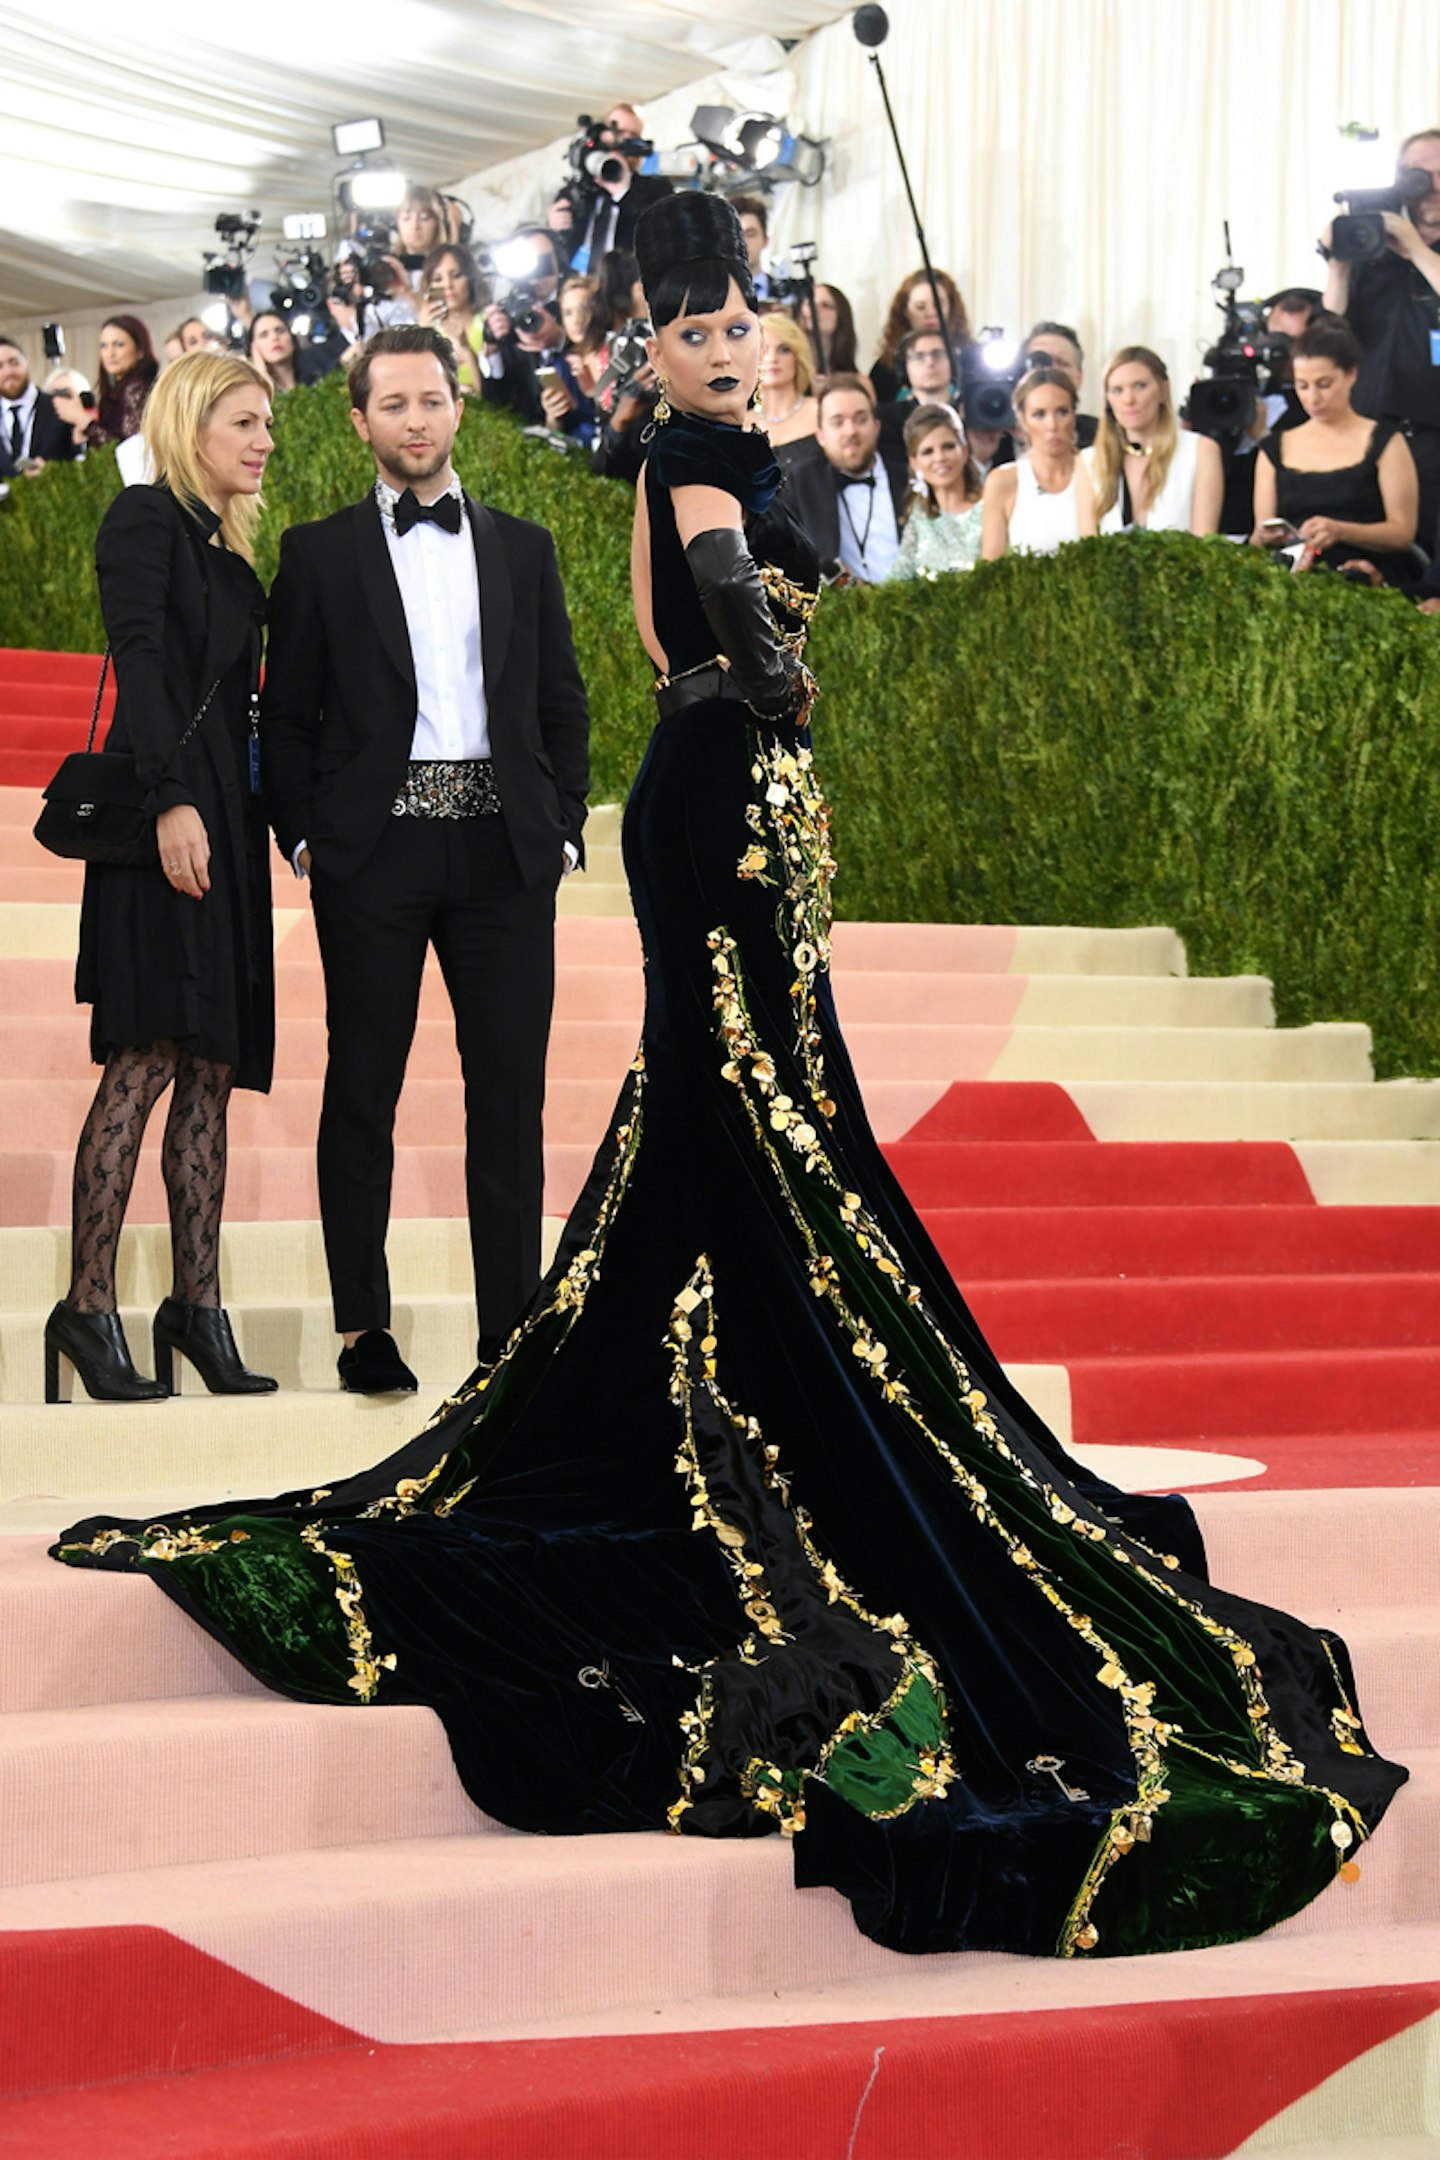 met gala fashion style red carpet celebrity dress gown technology best dressed worst